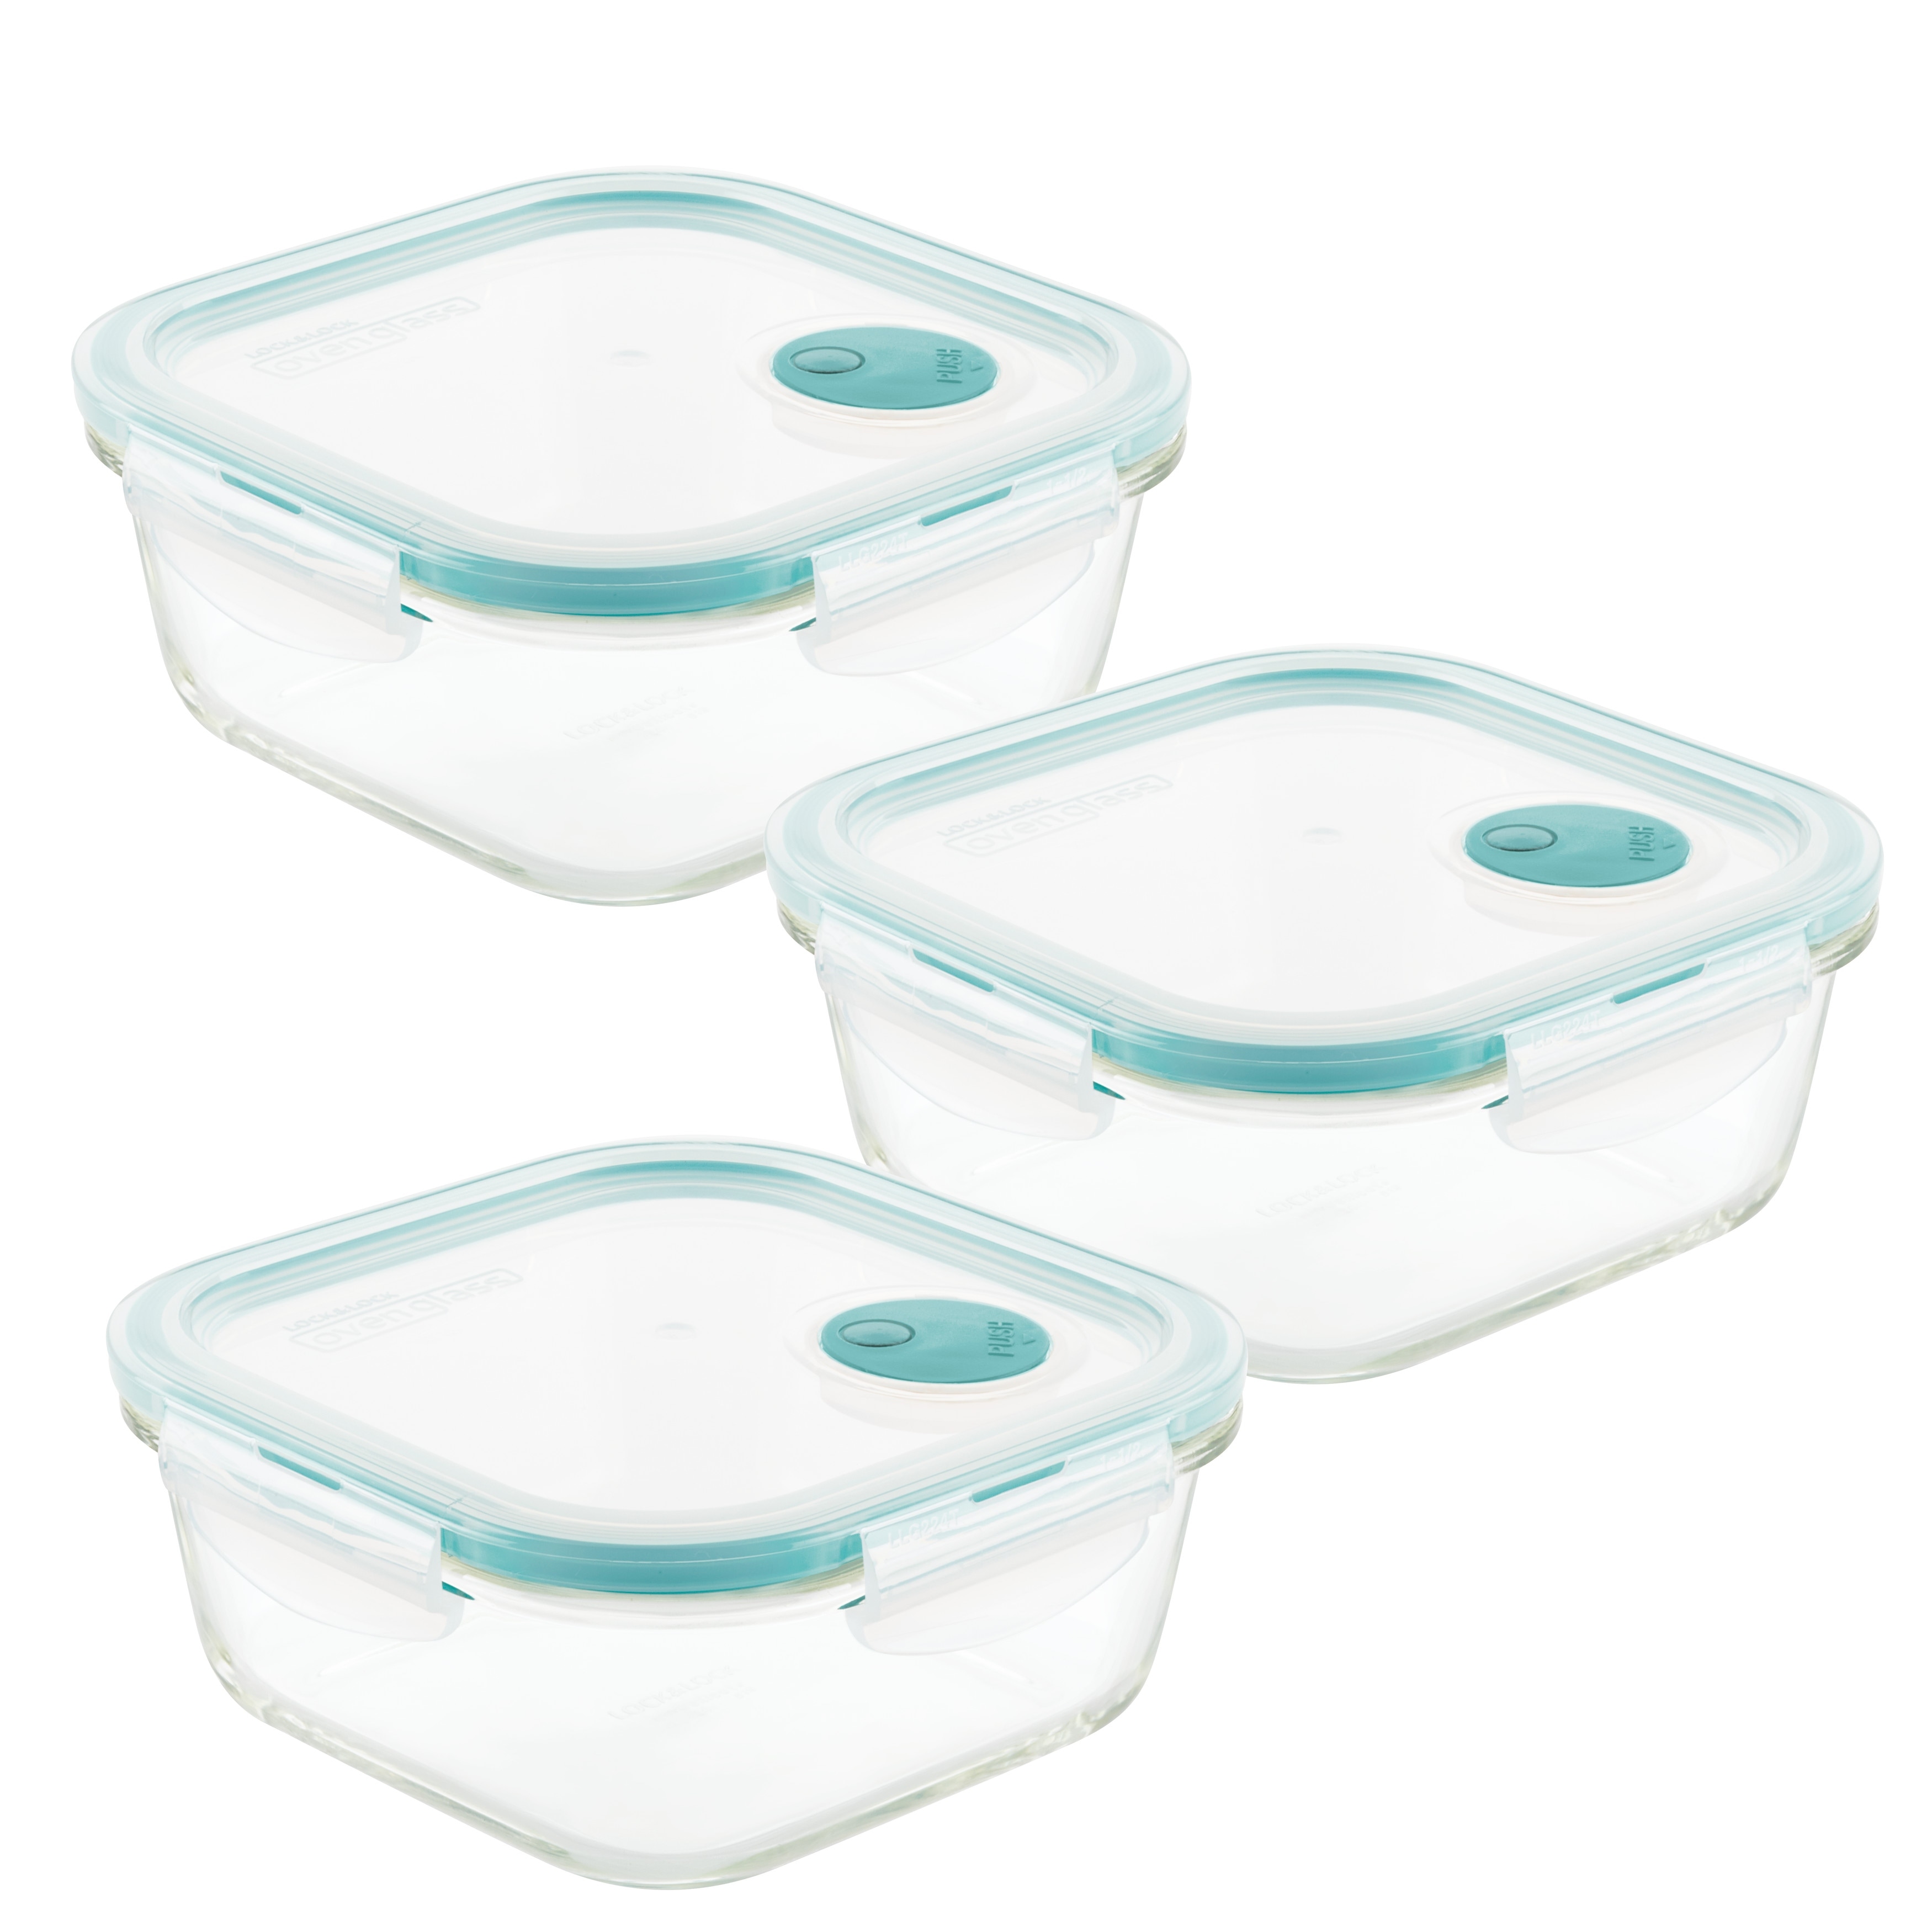 https://ak1.ostkcdn.com/images/products/is/images/direct/552667821be8966694b0bfd0c21257b0a9cc9d1c/LocknLock-Purely-Better-Vented-Glass-Food-Storage-Container%2C-25-Ounce%2C-Set-of-Three.jpg